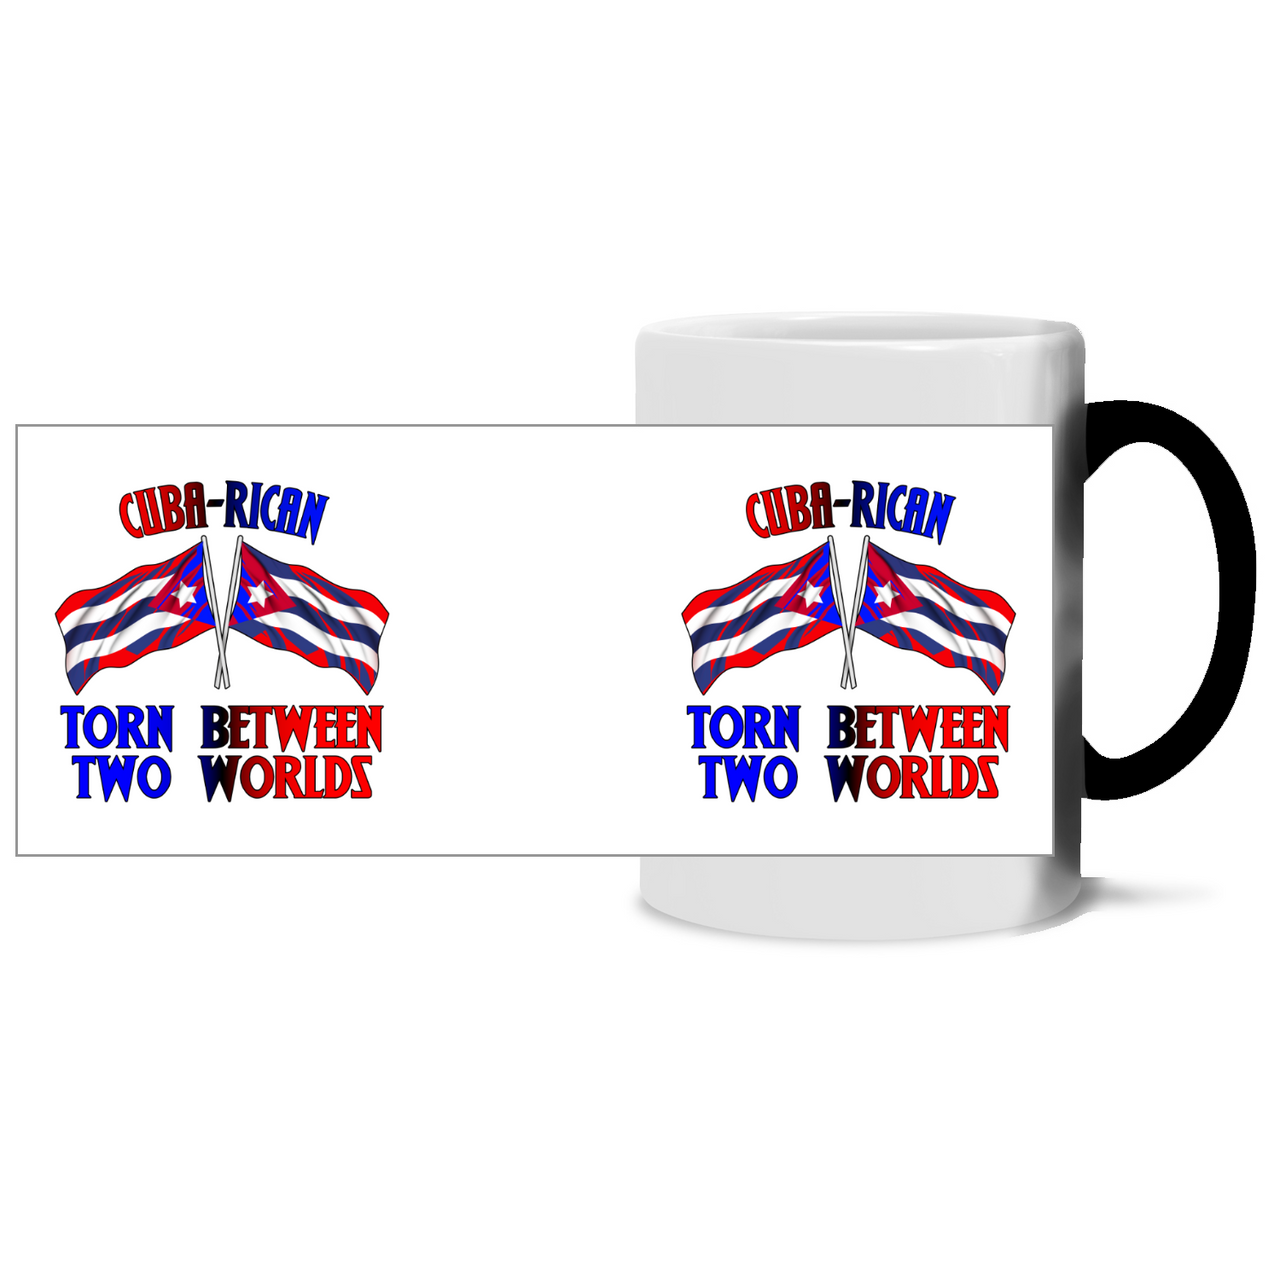 Cuba-Rican Town Between Two Worlds Coffe Cup